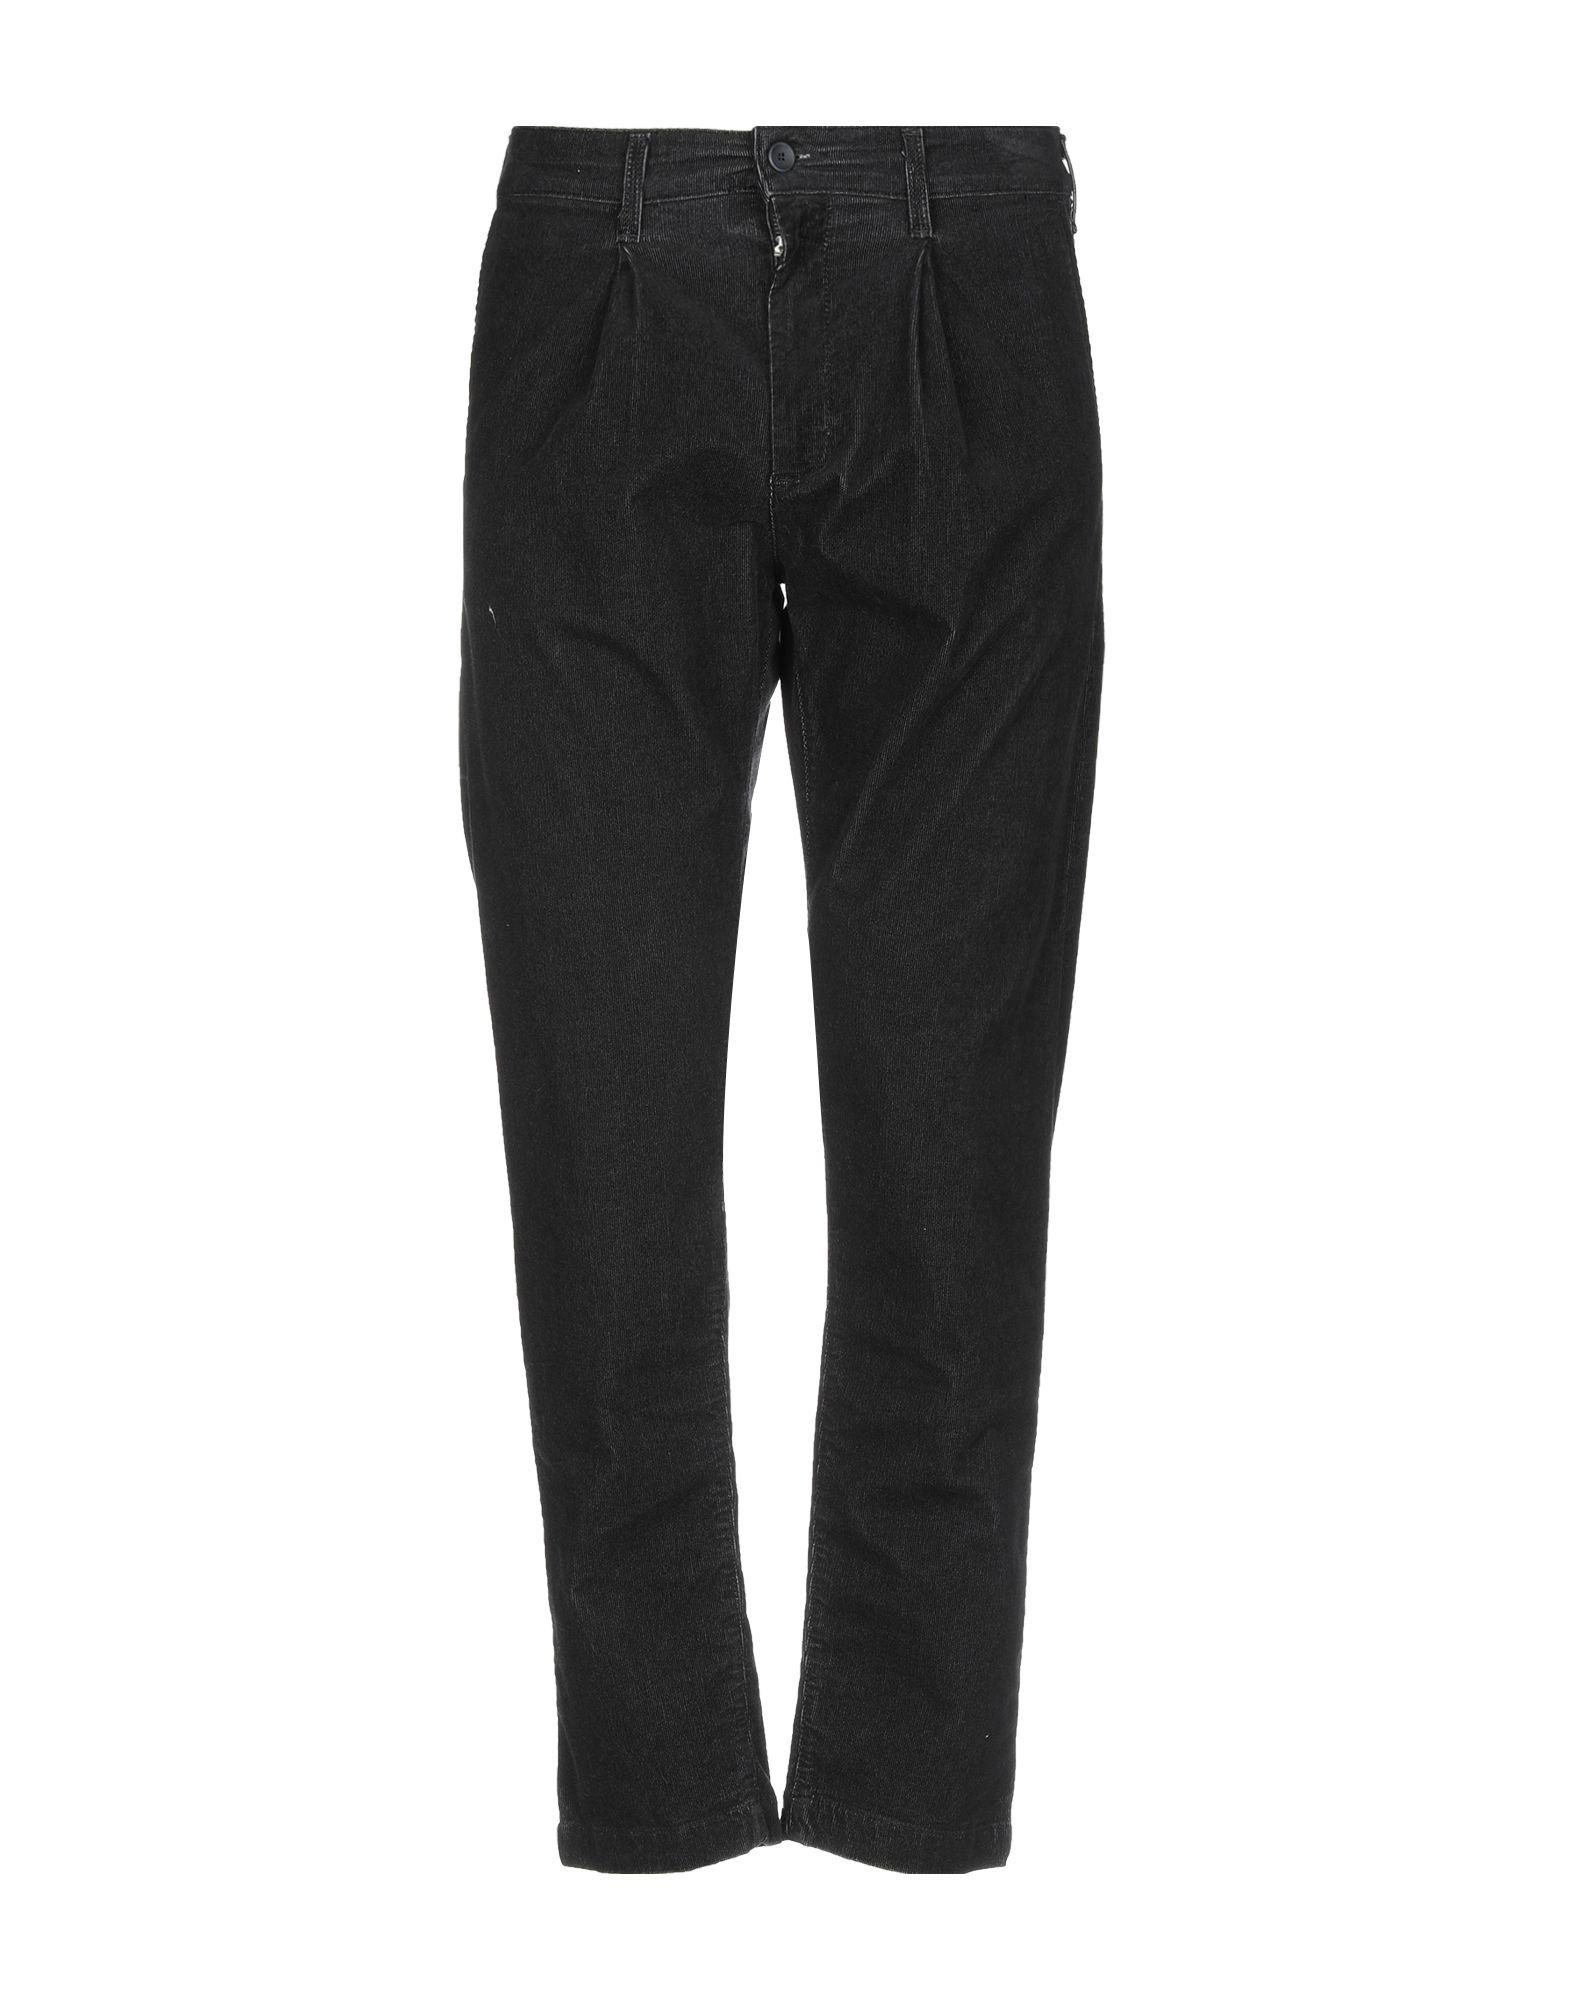 SELECTED Cotton Casual Pants in Black for Men - Lyst